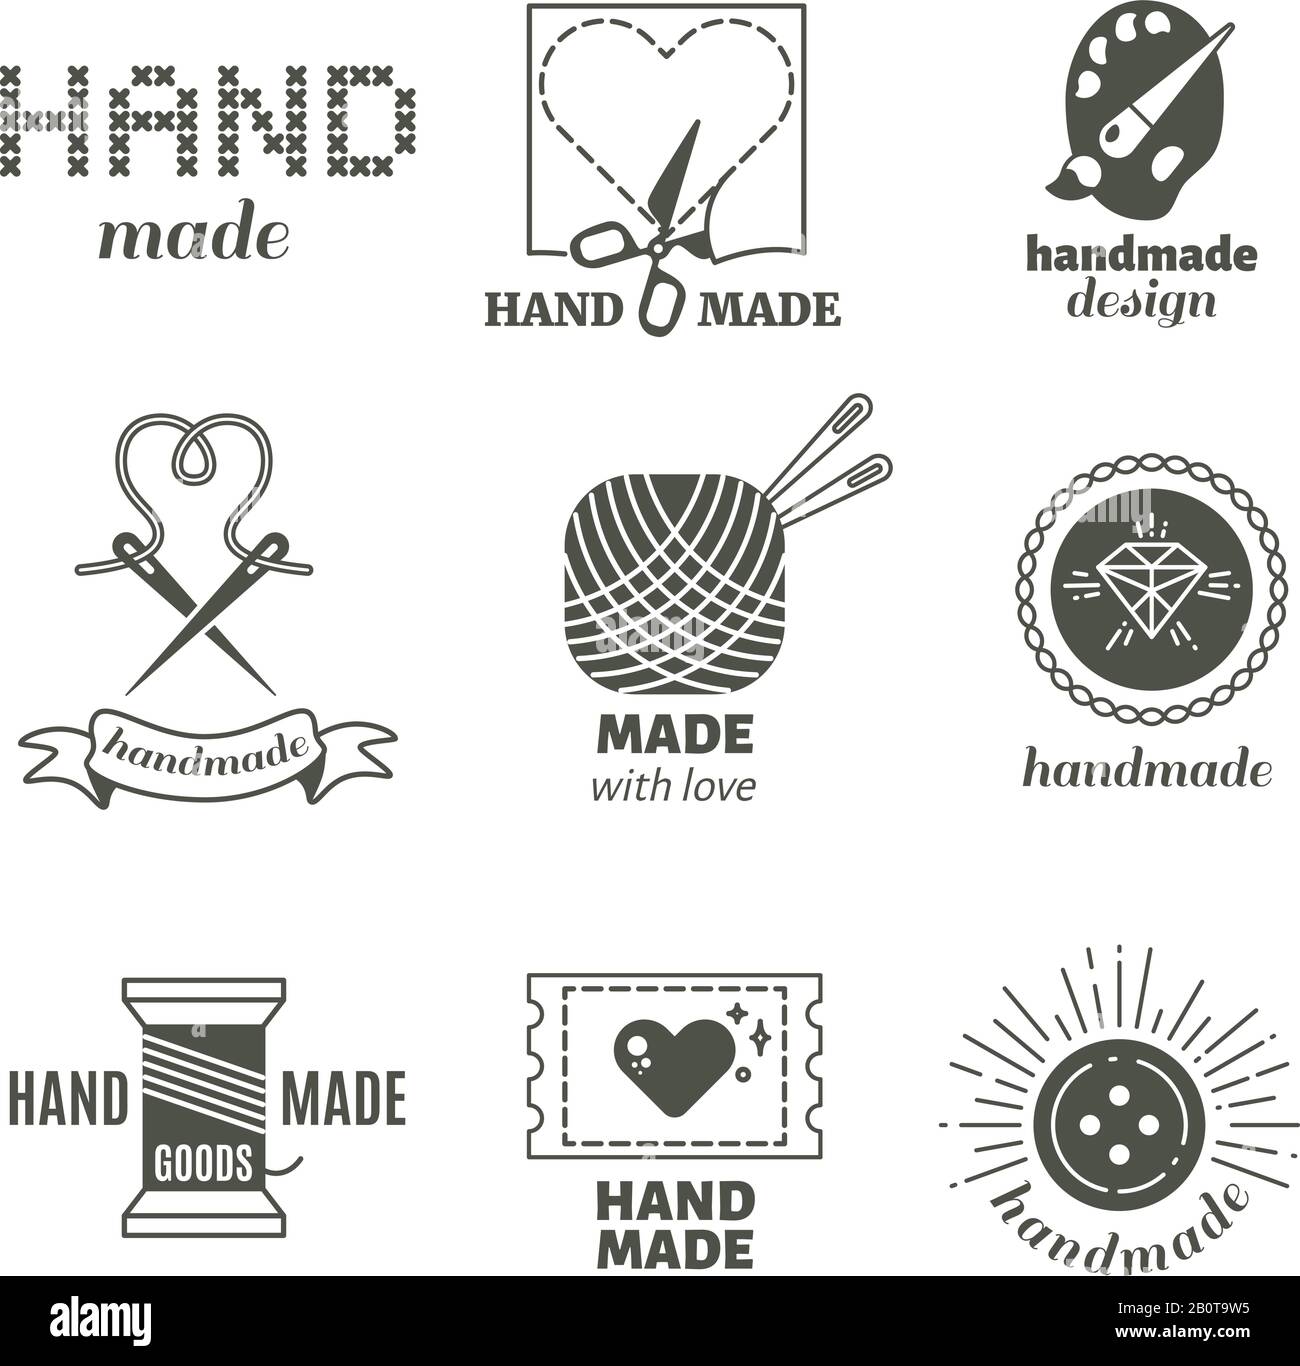 Handmade labels. Made with love badges. Vintage design elements. Vector.  Isolated. Stock Vector